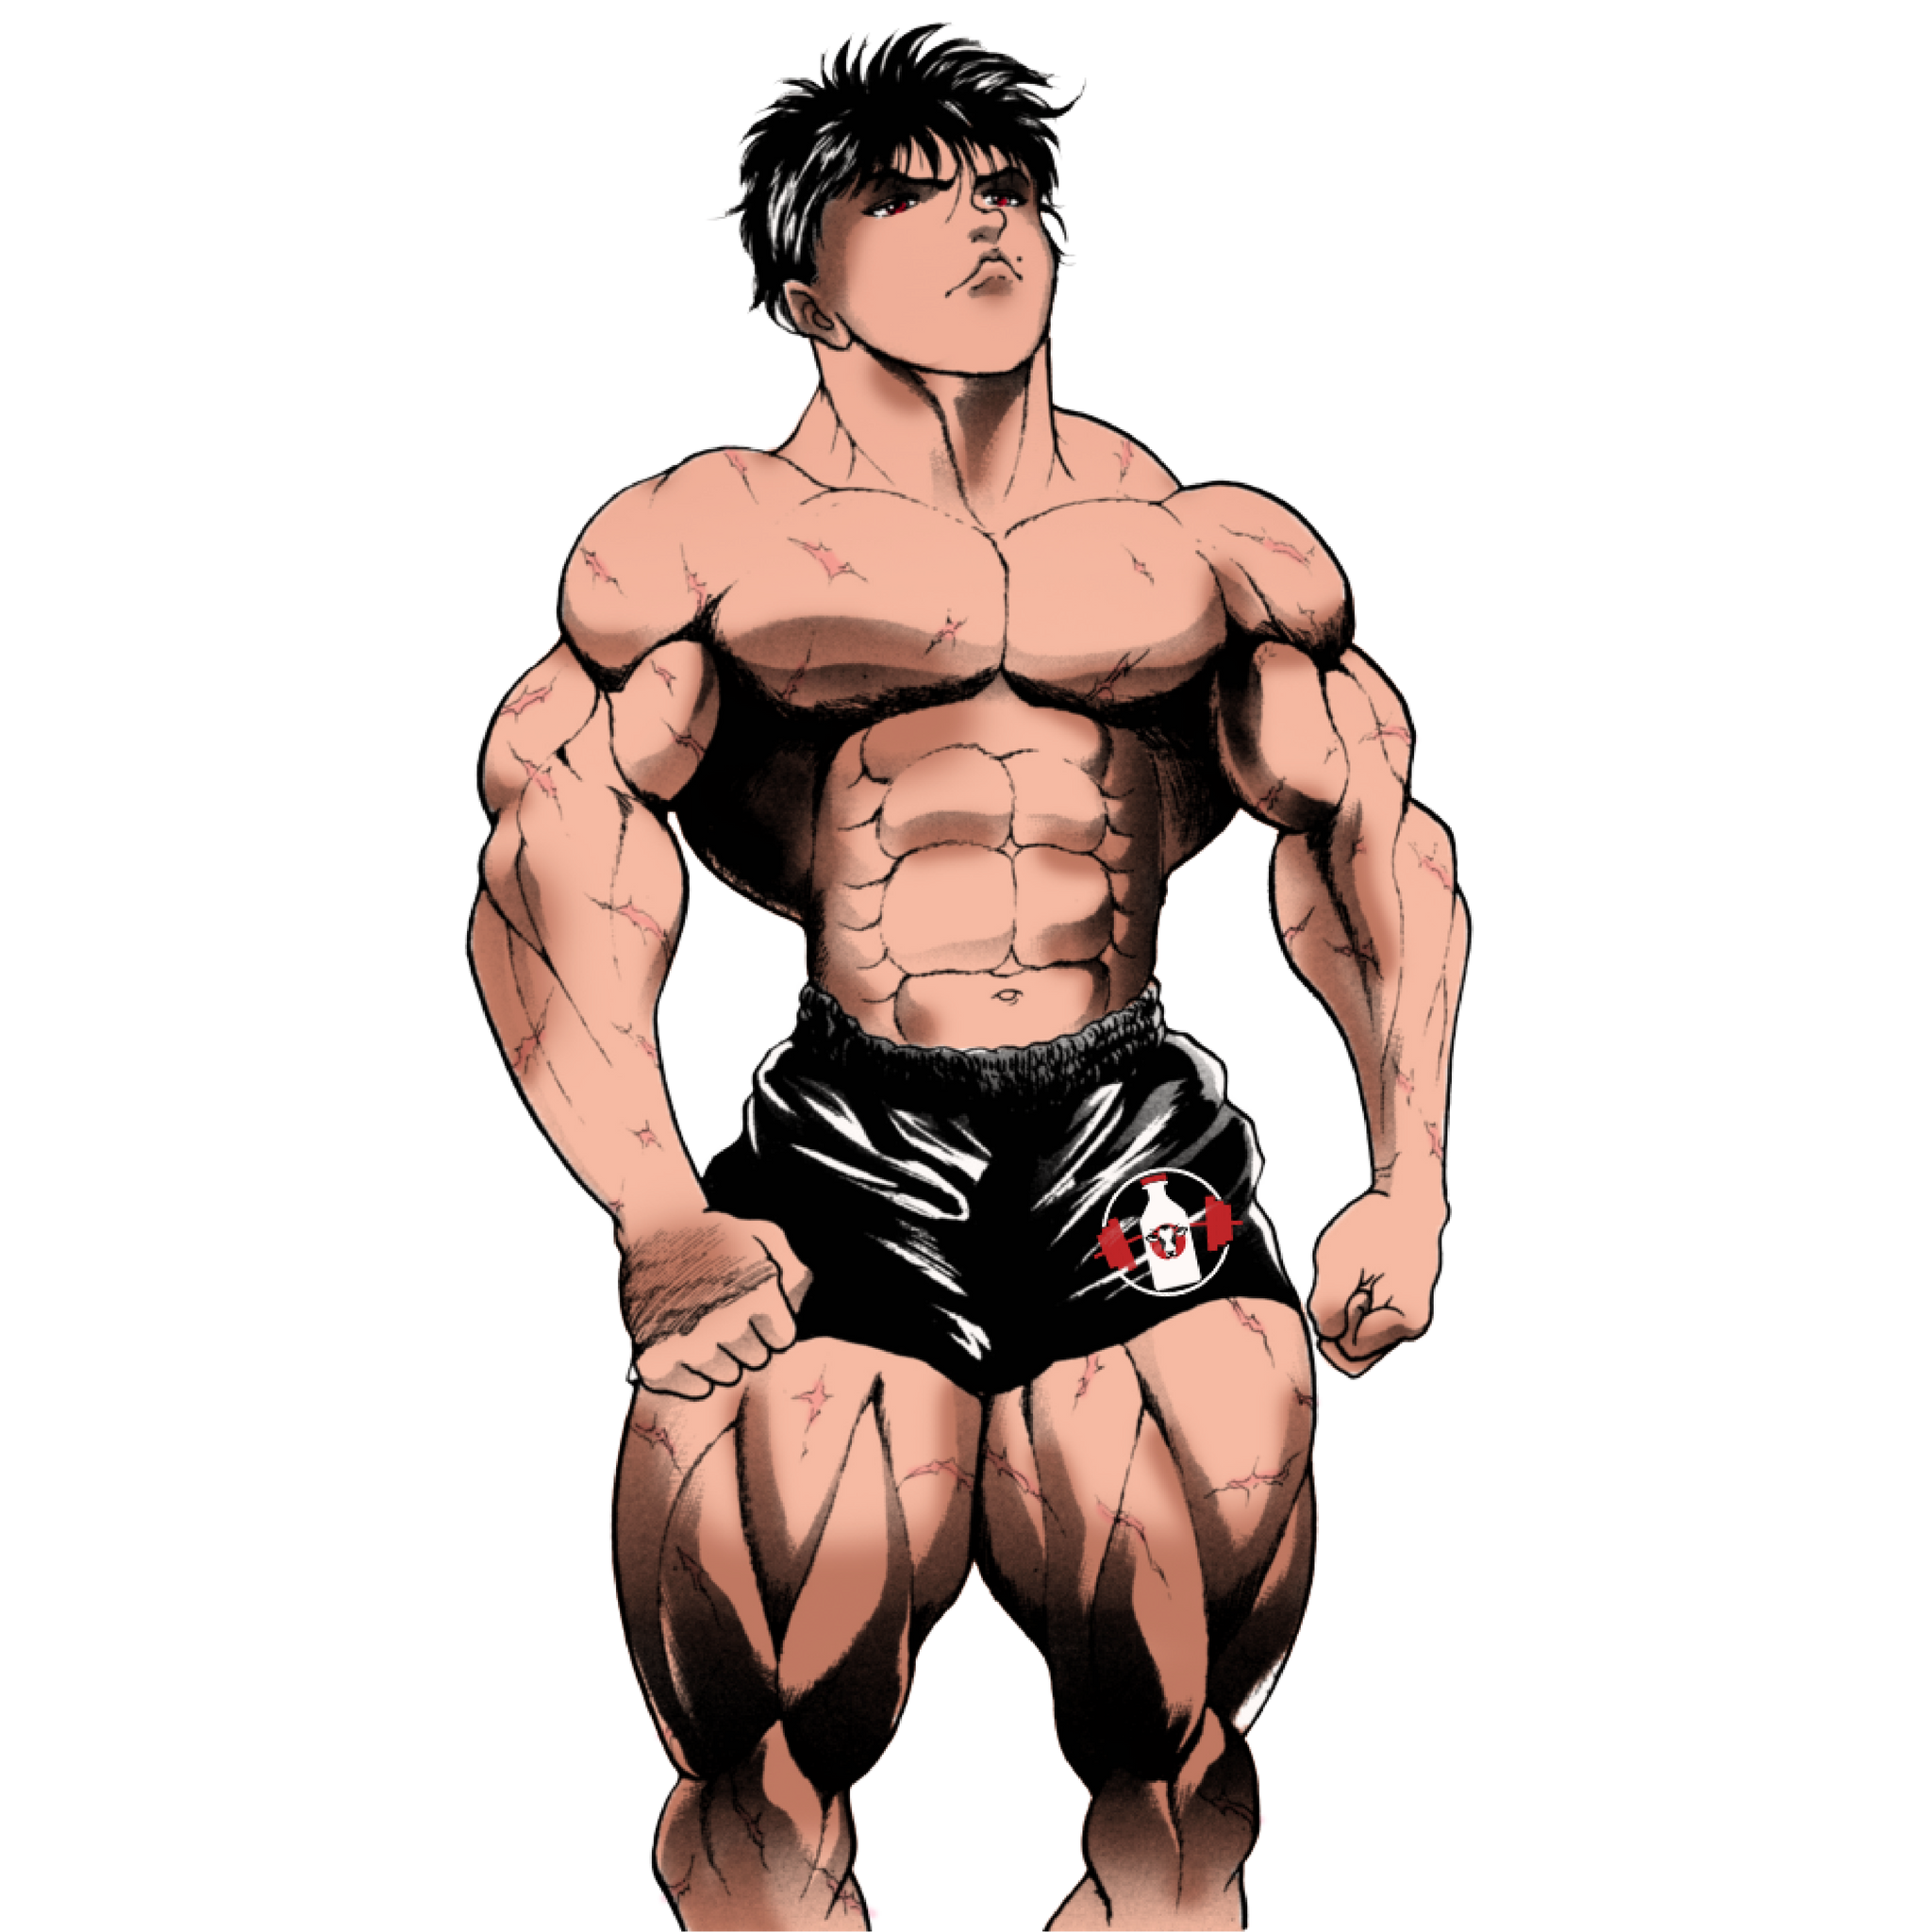 Discover more than 84 bodybuilding anime wallpaper best - in.duhocakina